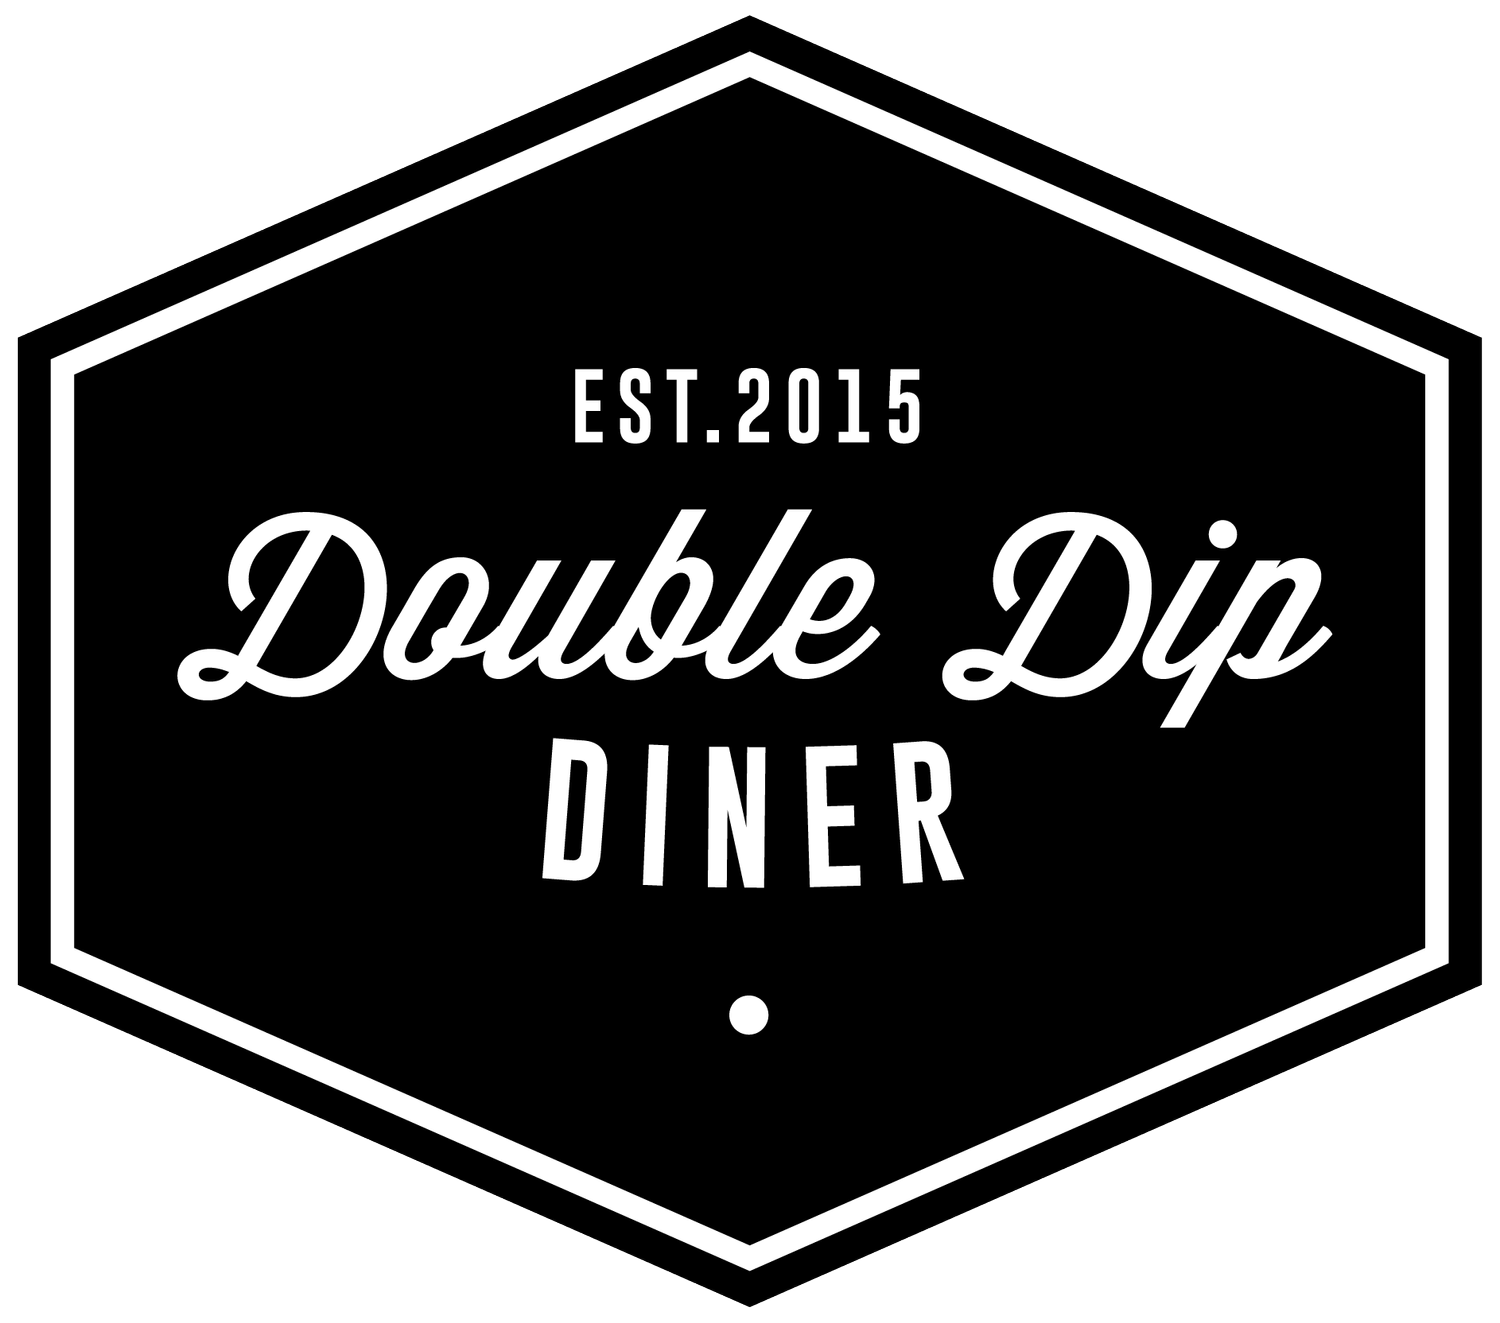 Double Dip Diner